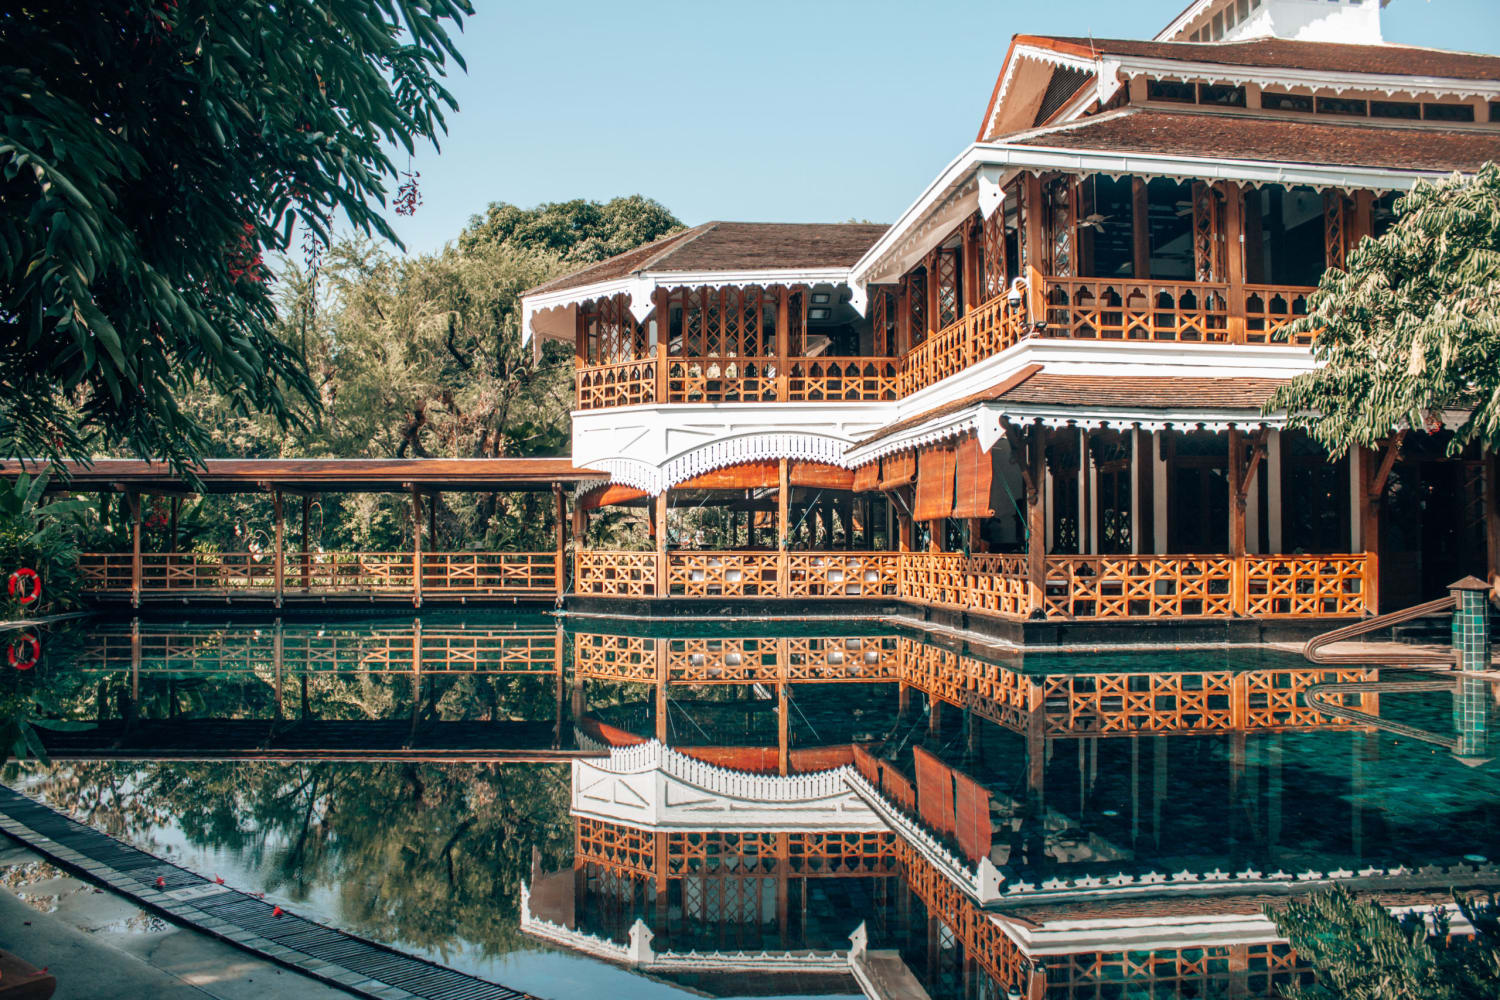 Staying At Belmond Governor's Residence In Yangon